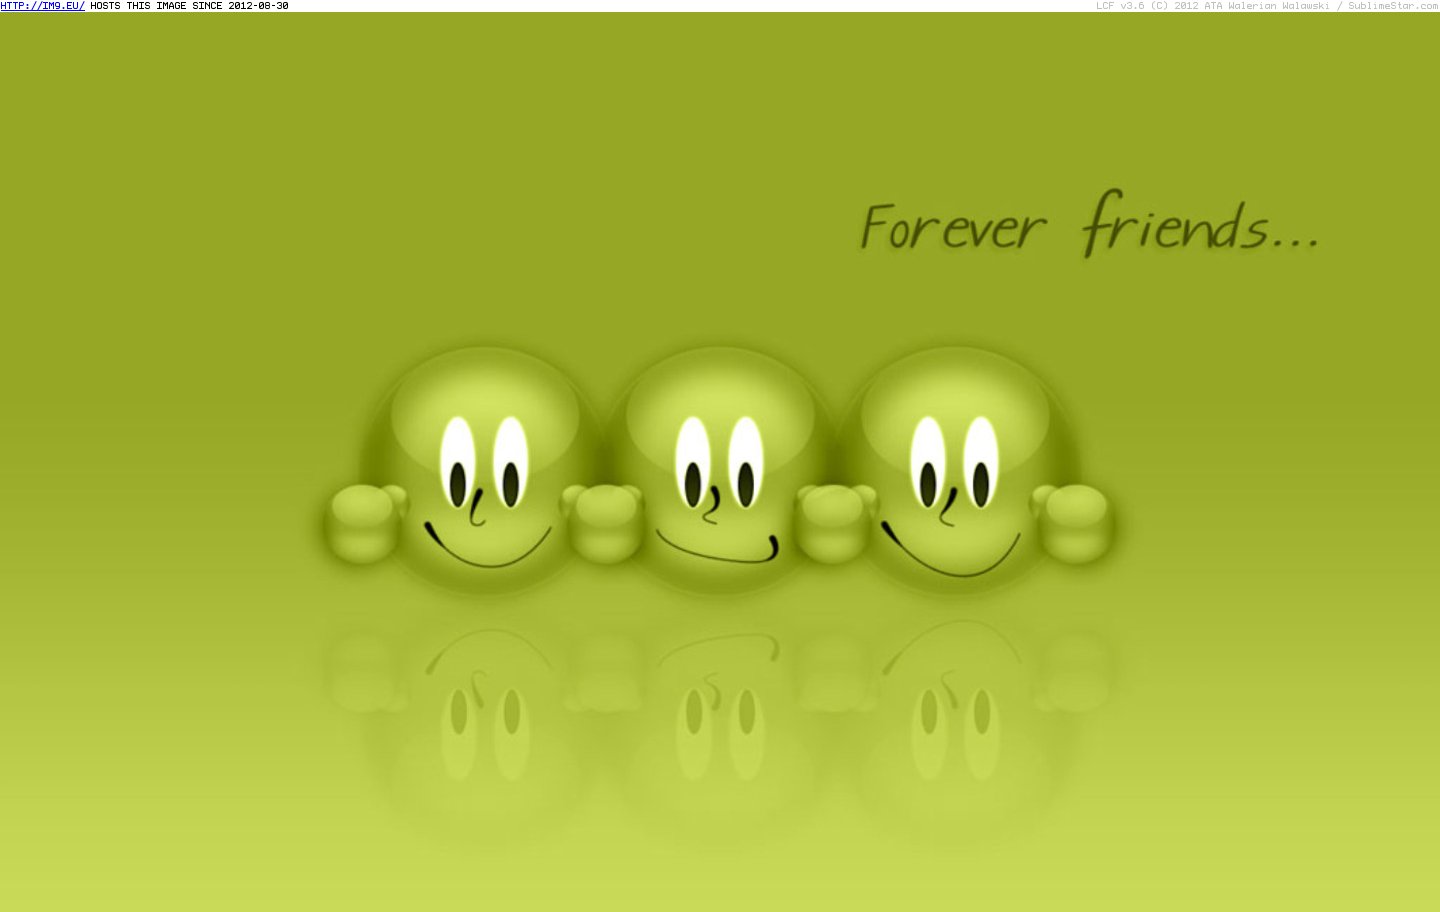 Related To Best Friends Forever Quotes Image And Wallpaper